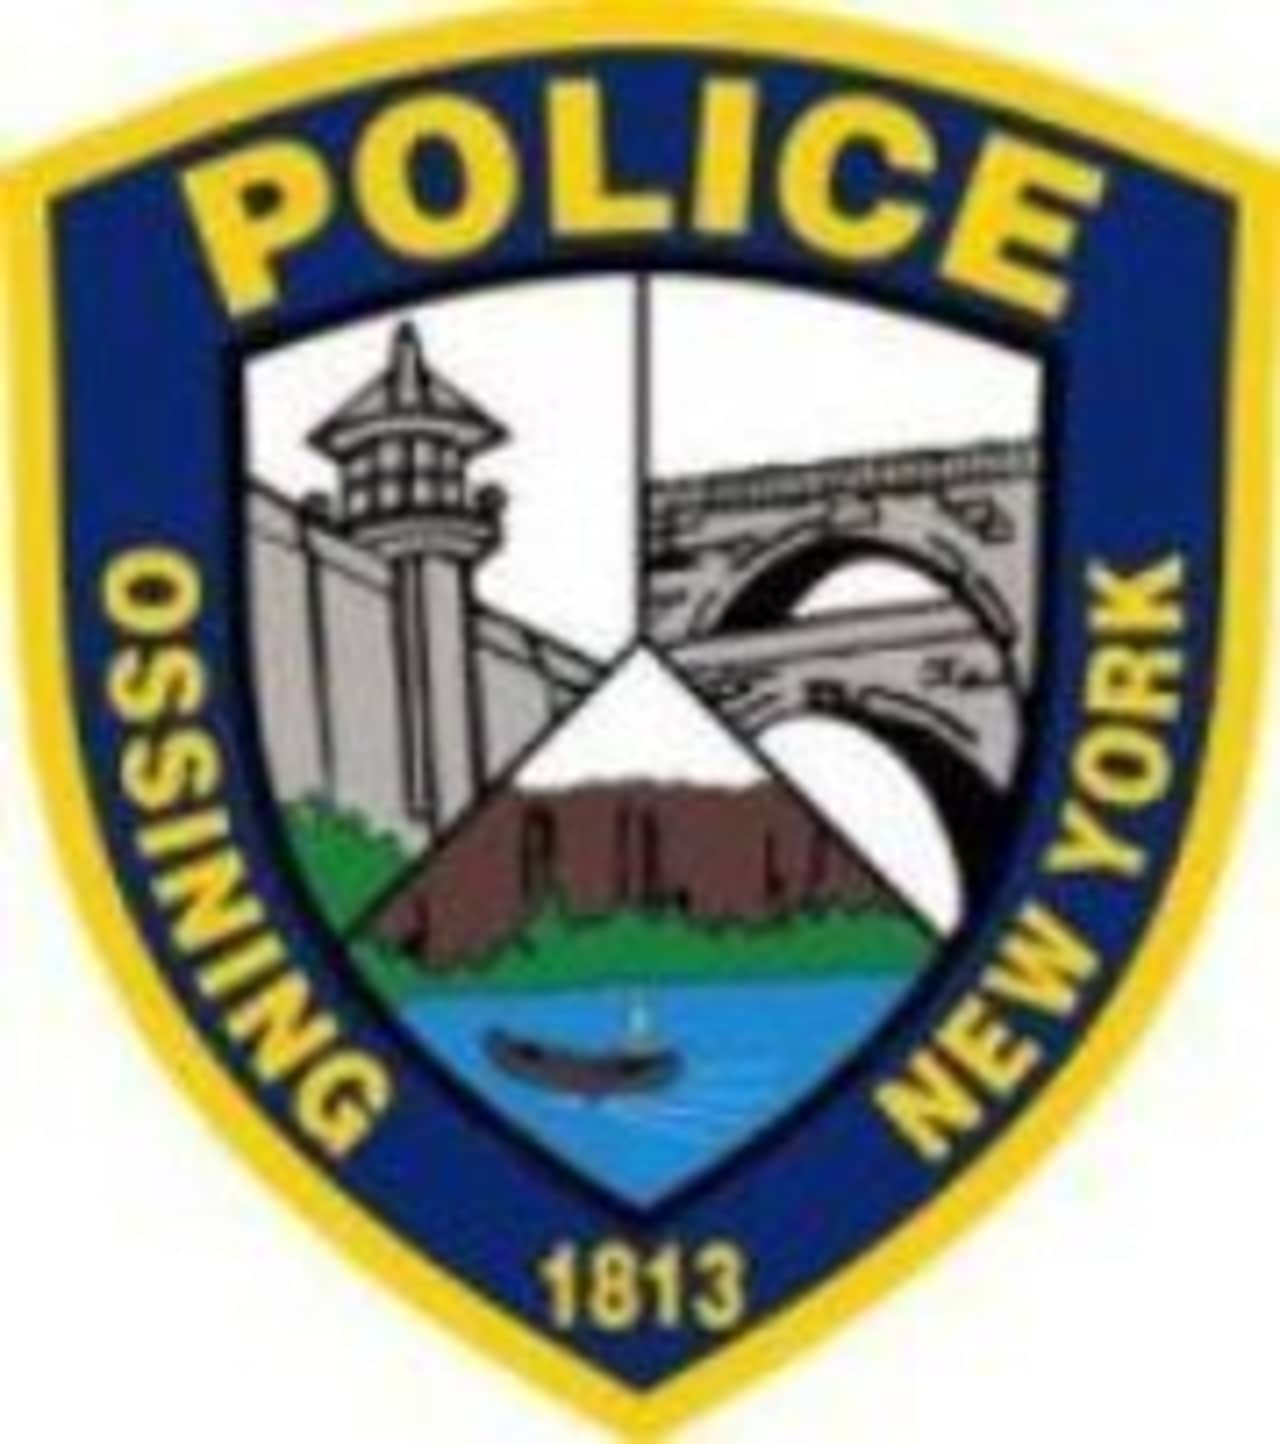 An Ossining Man is in critical condition after being struck by a car on Wednesday, Nov. 20. 